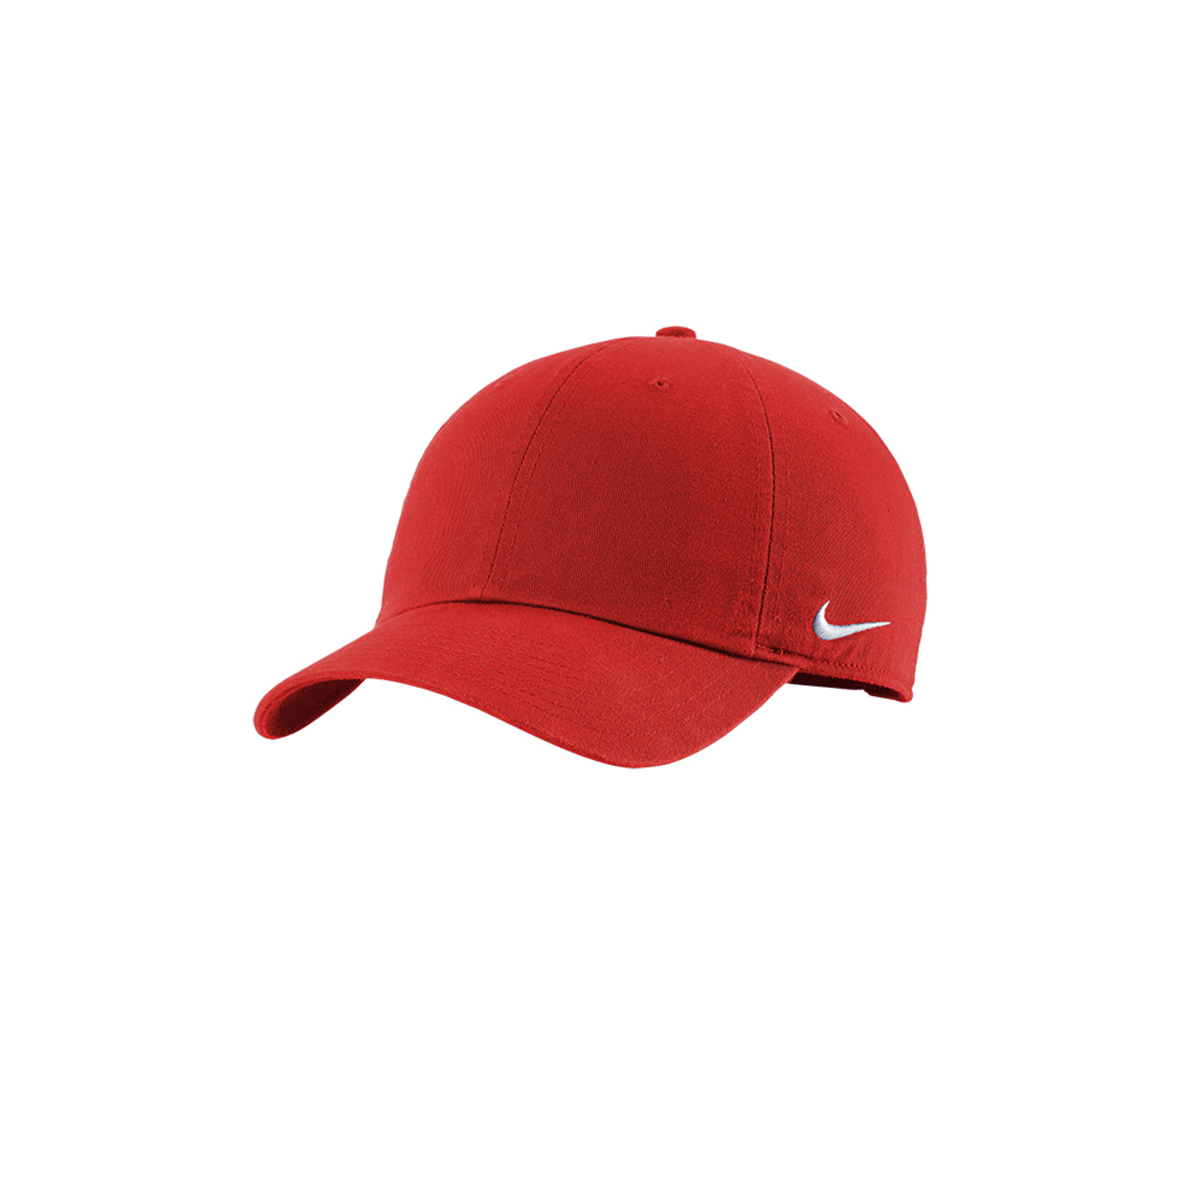 Boston Red Sox Nike Heritage86 Current Unstruct Cotton Twill Cap